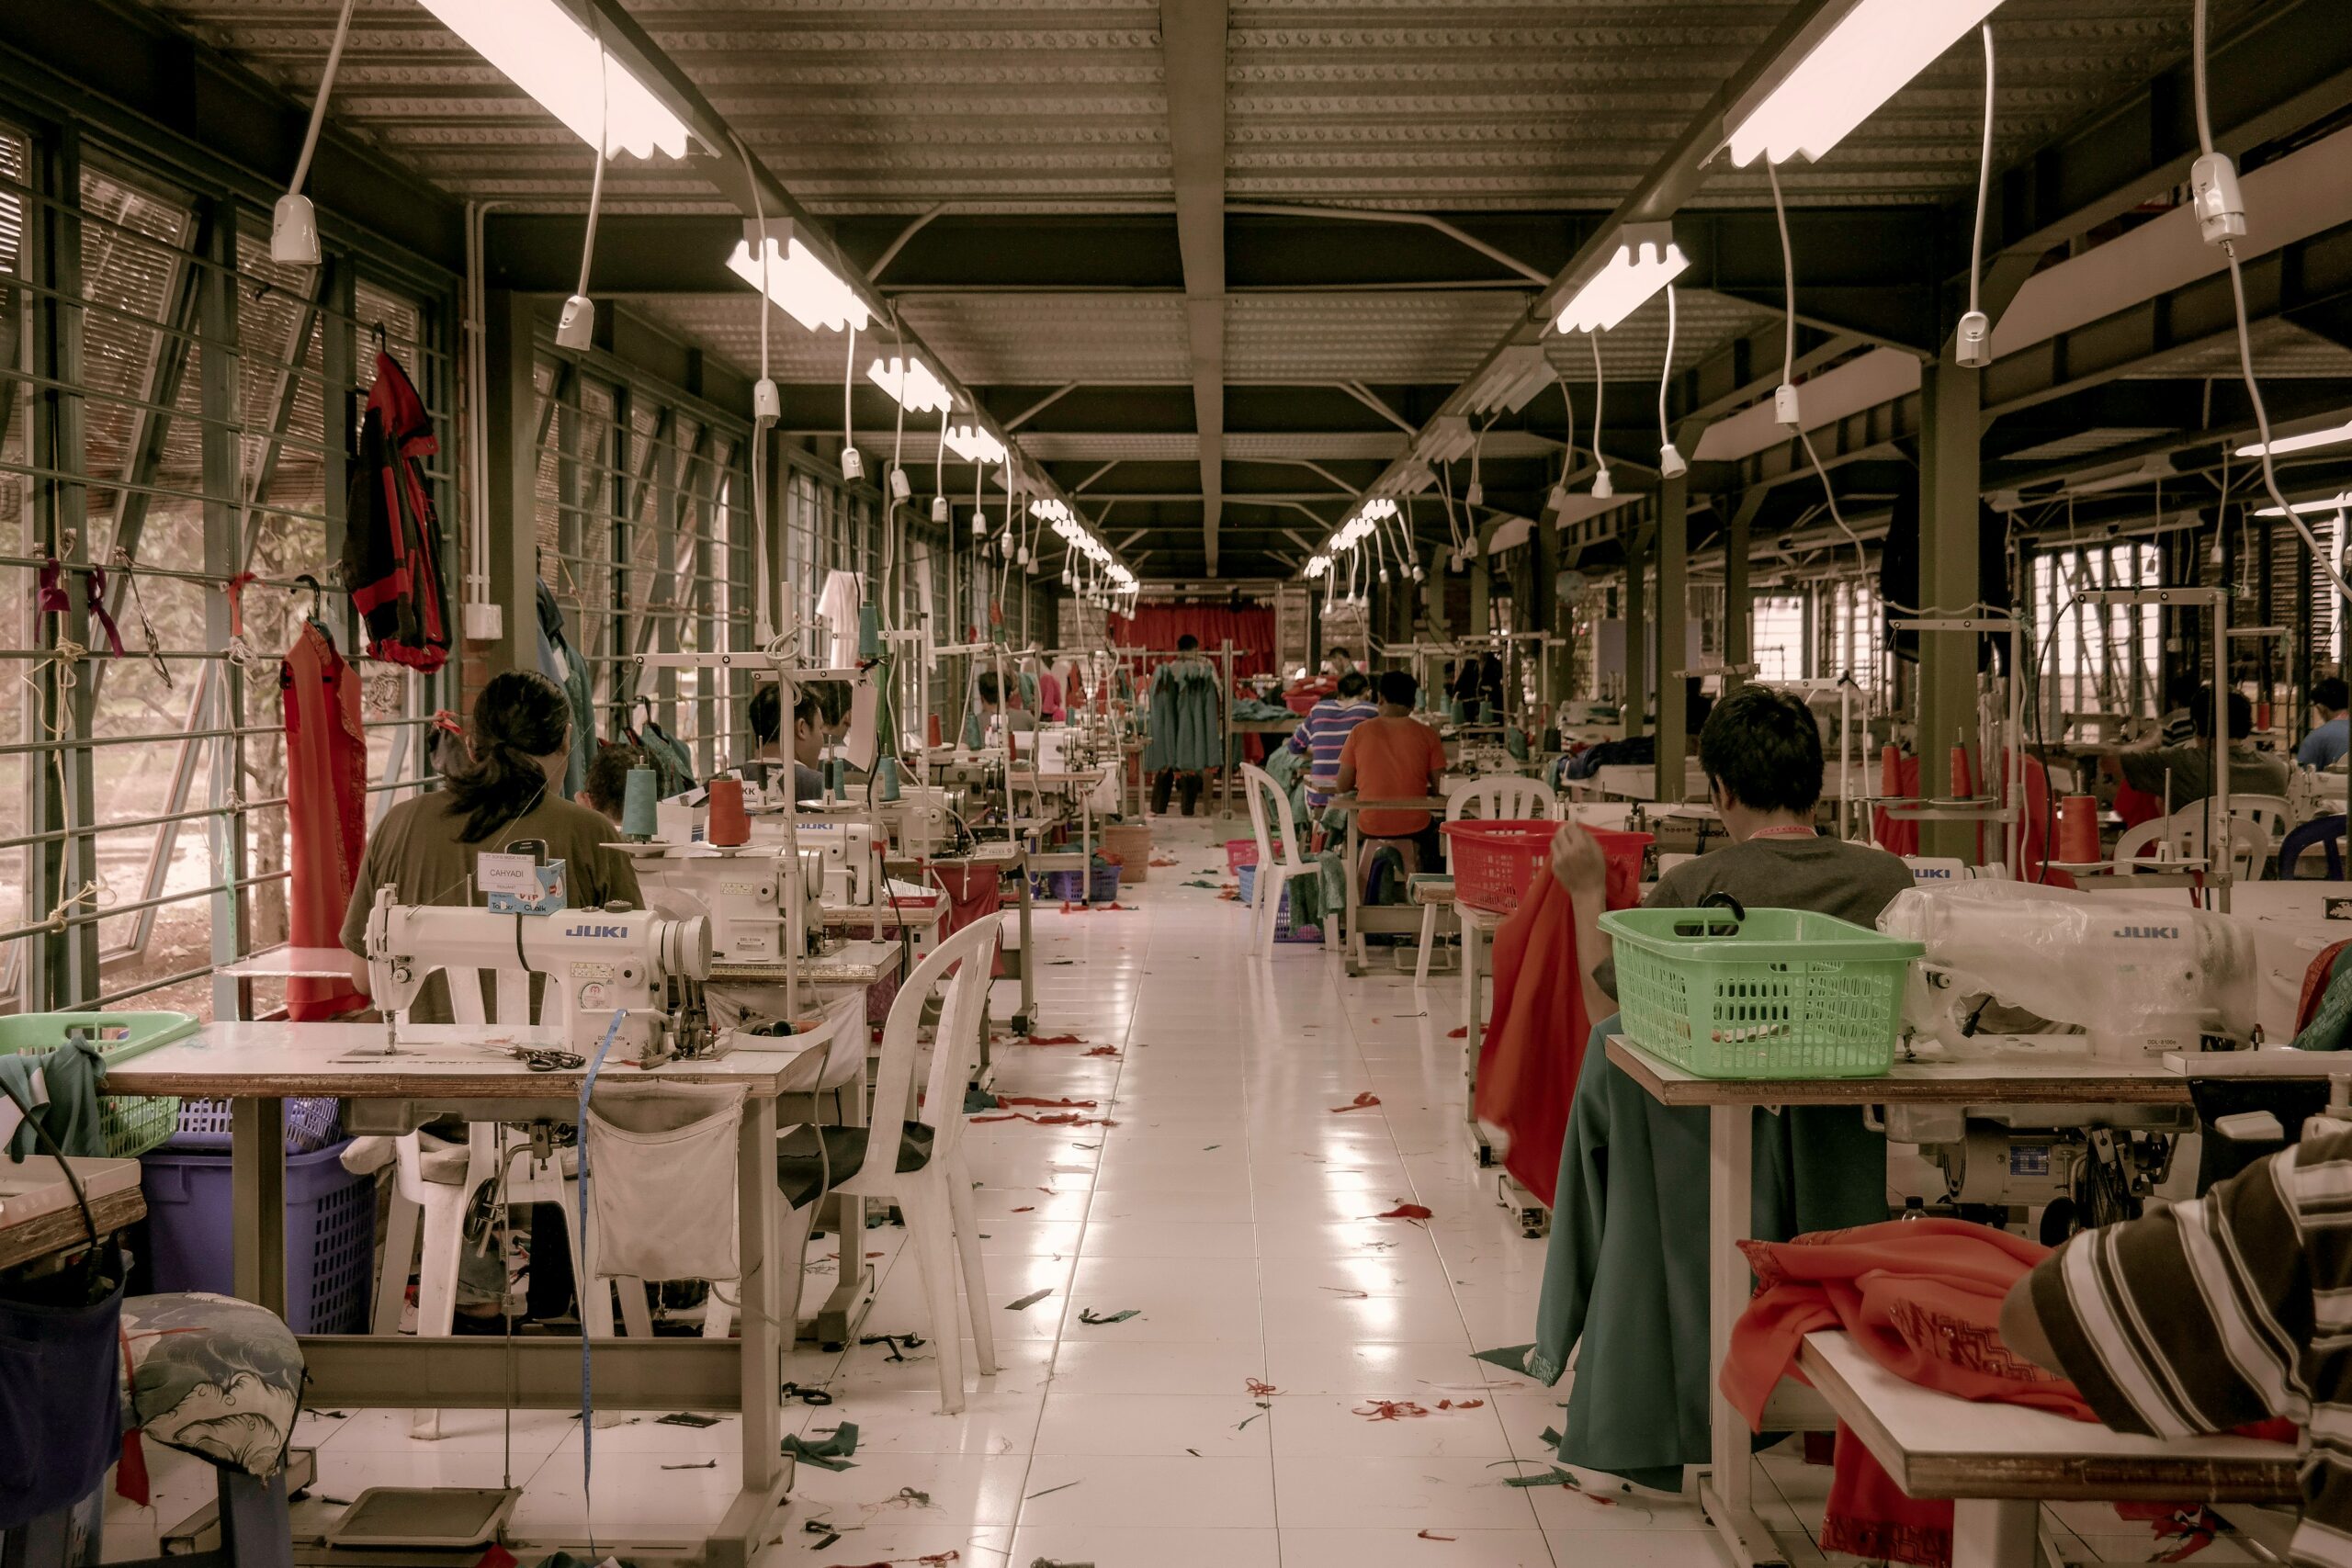 A small sweatshop filled with workers and fabrics.